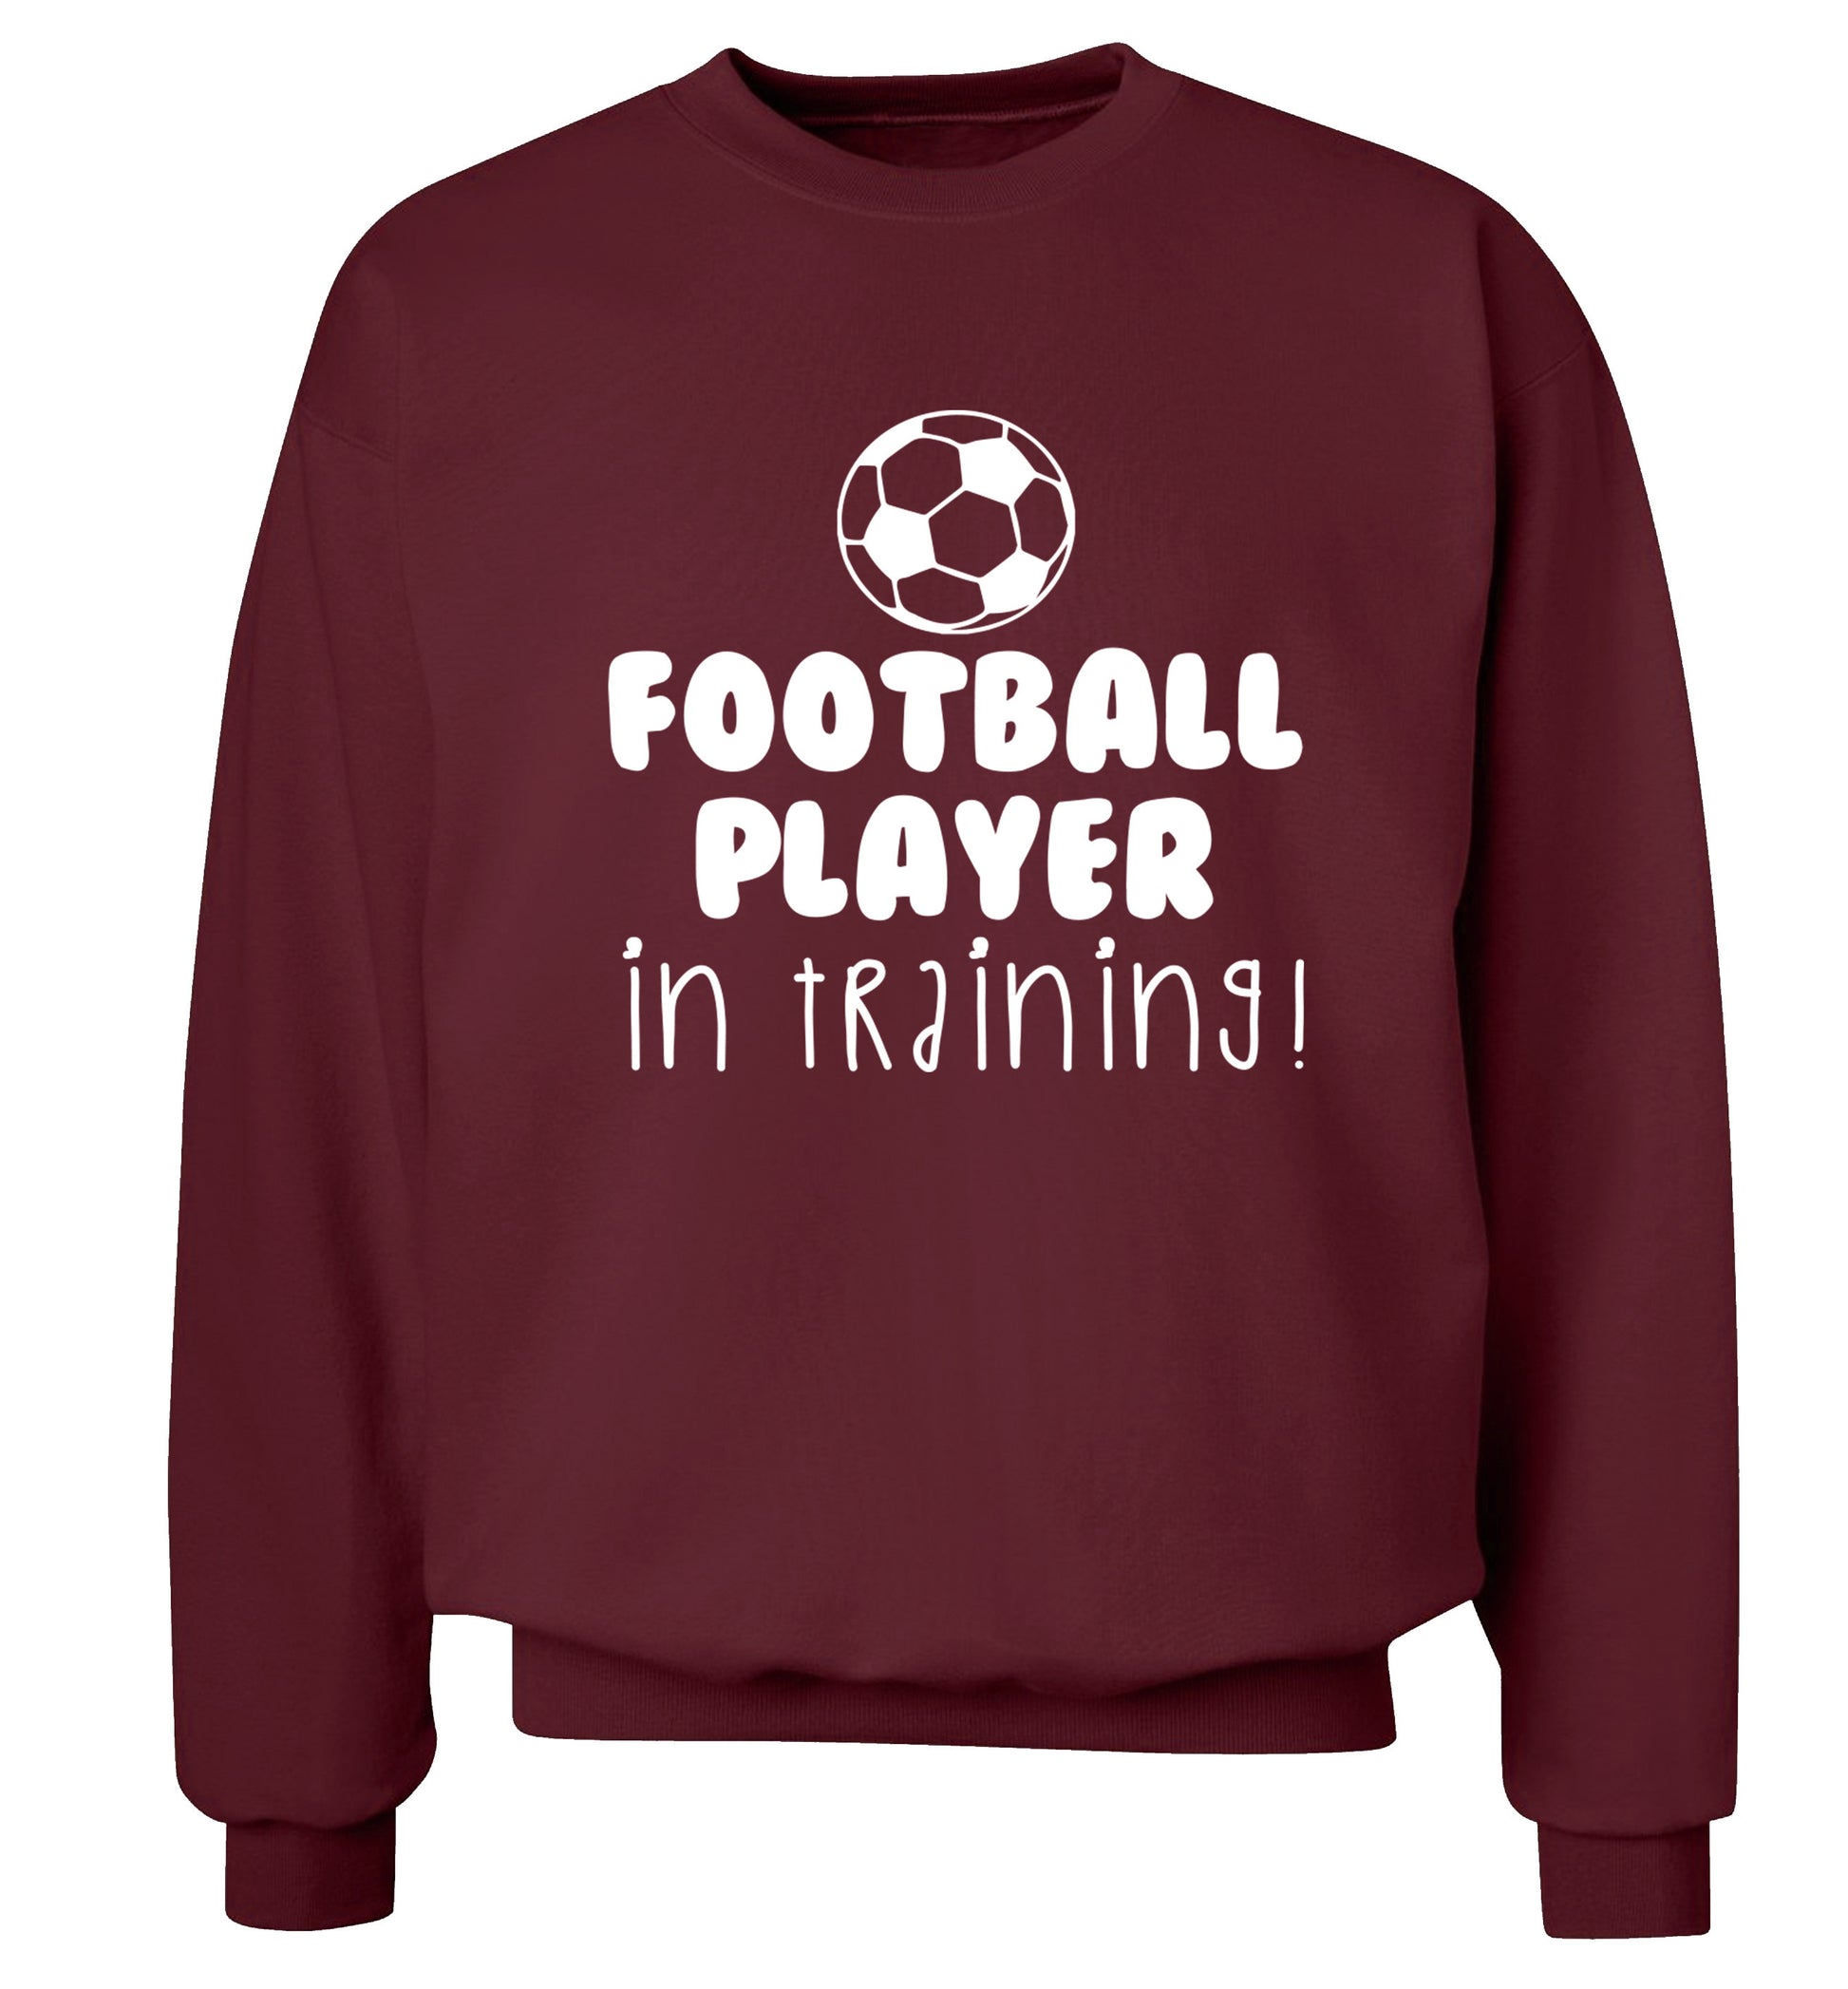 Football player in training Adult's unisex maroon Sweater 2XL